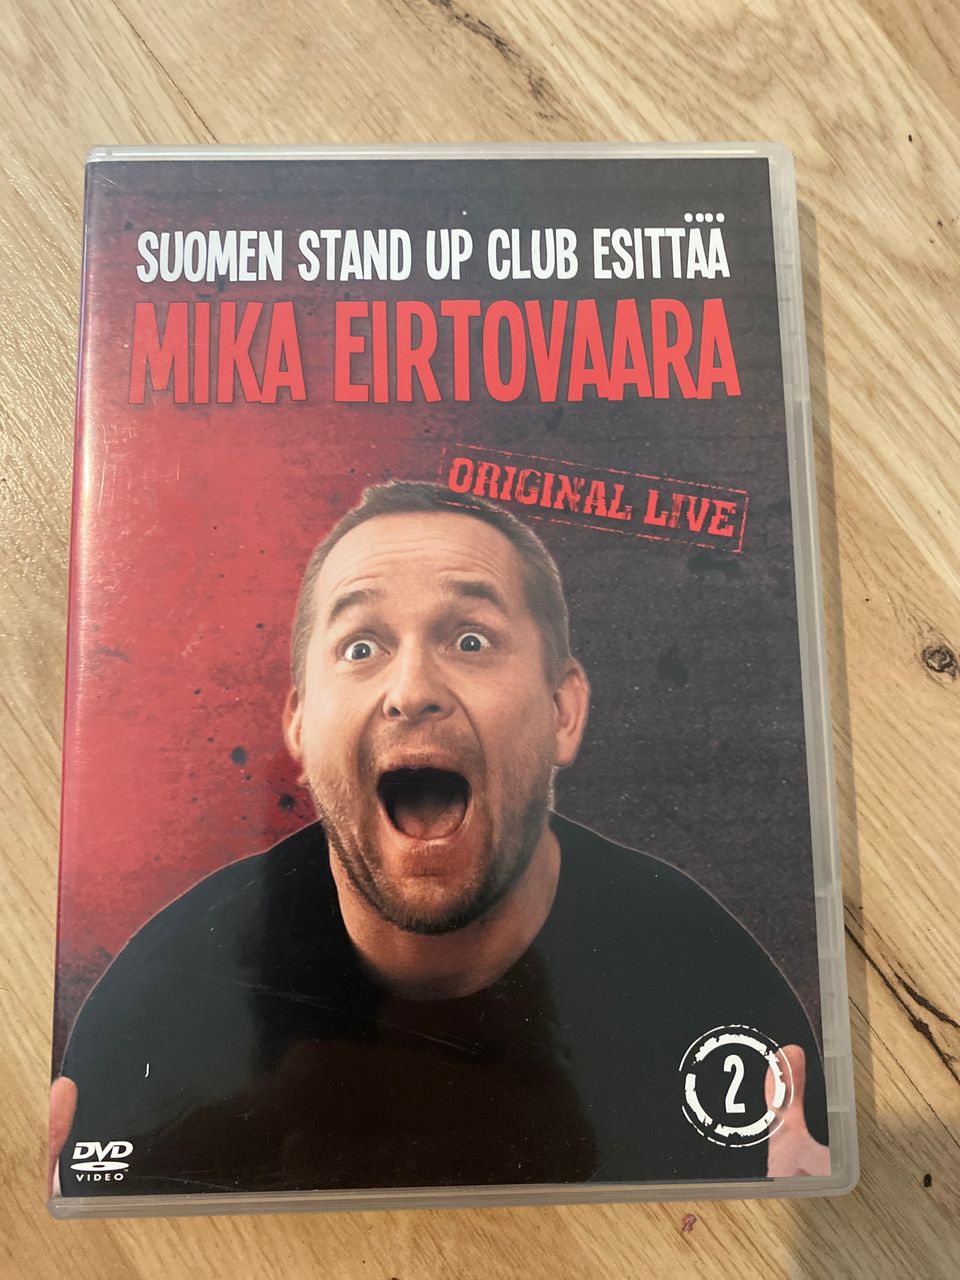 Stand up dvd